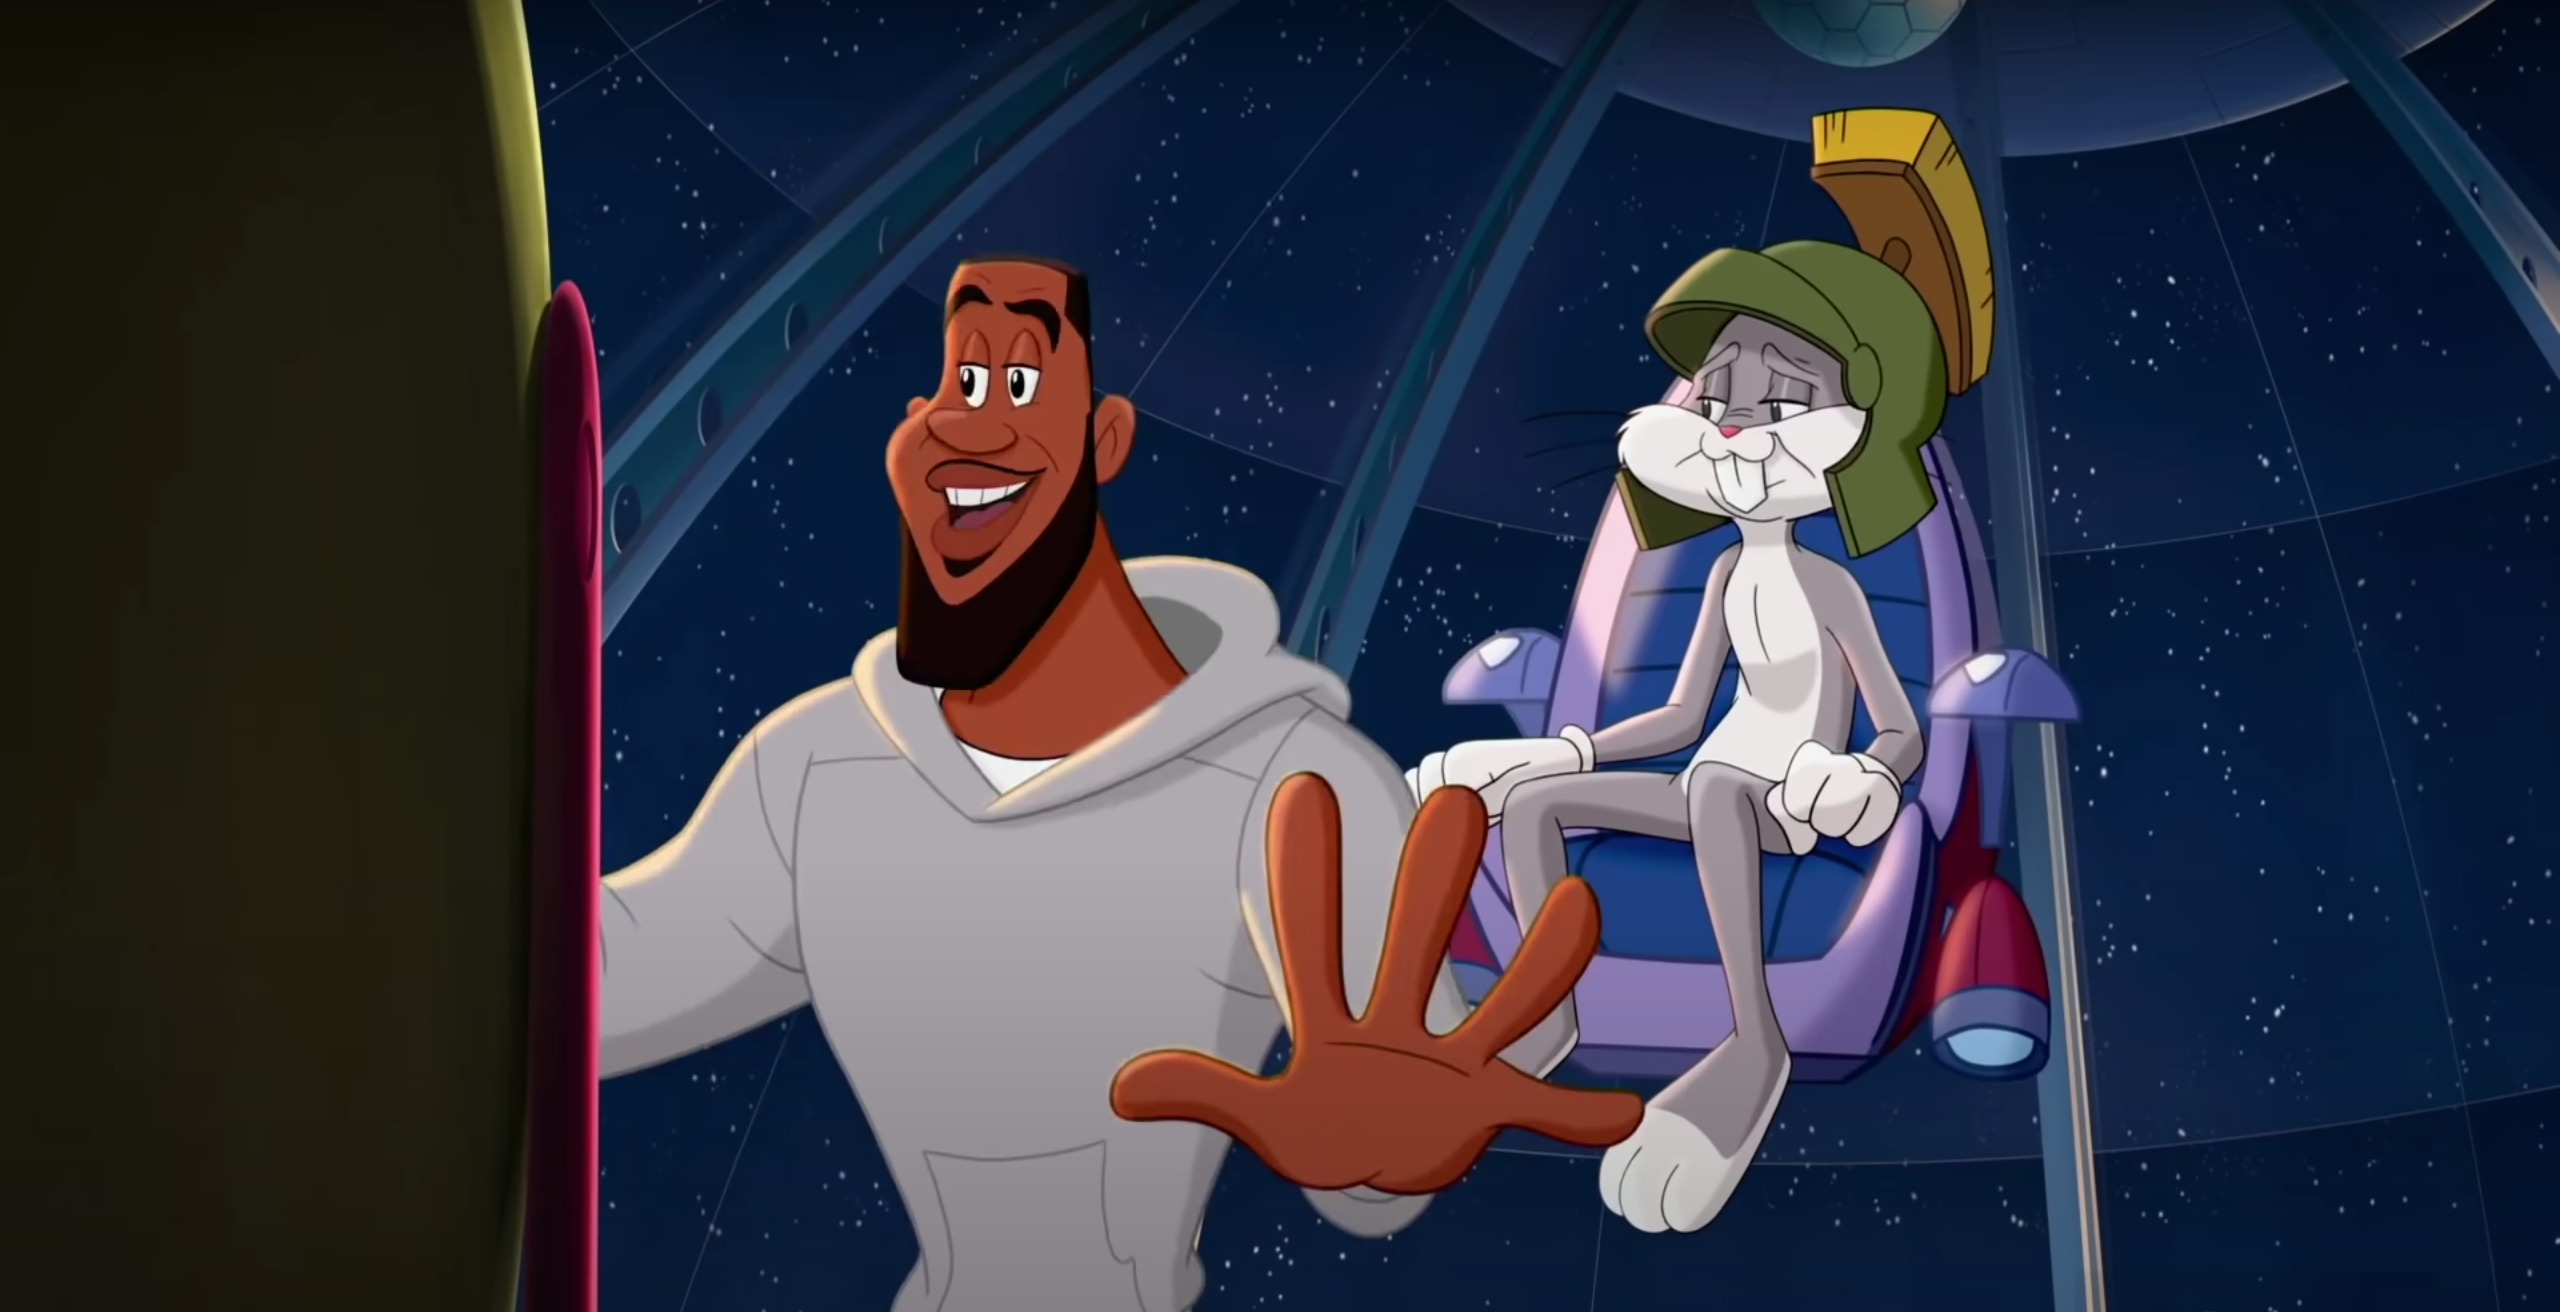 Space Jam 2' set to release in July 2021, but who will star